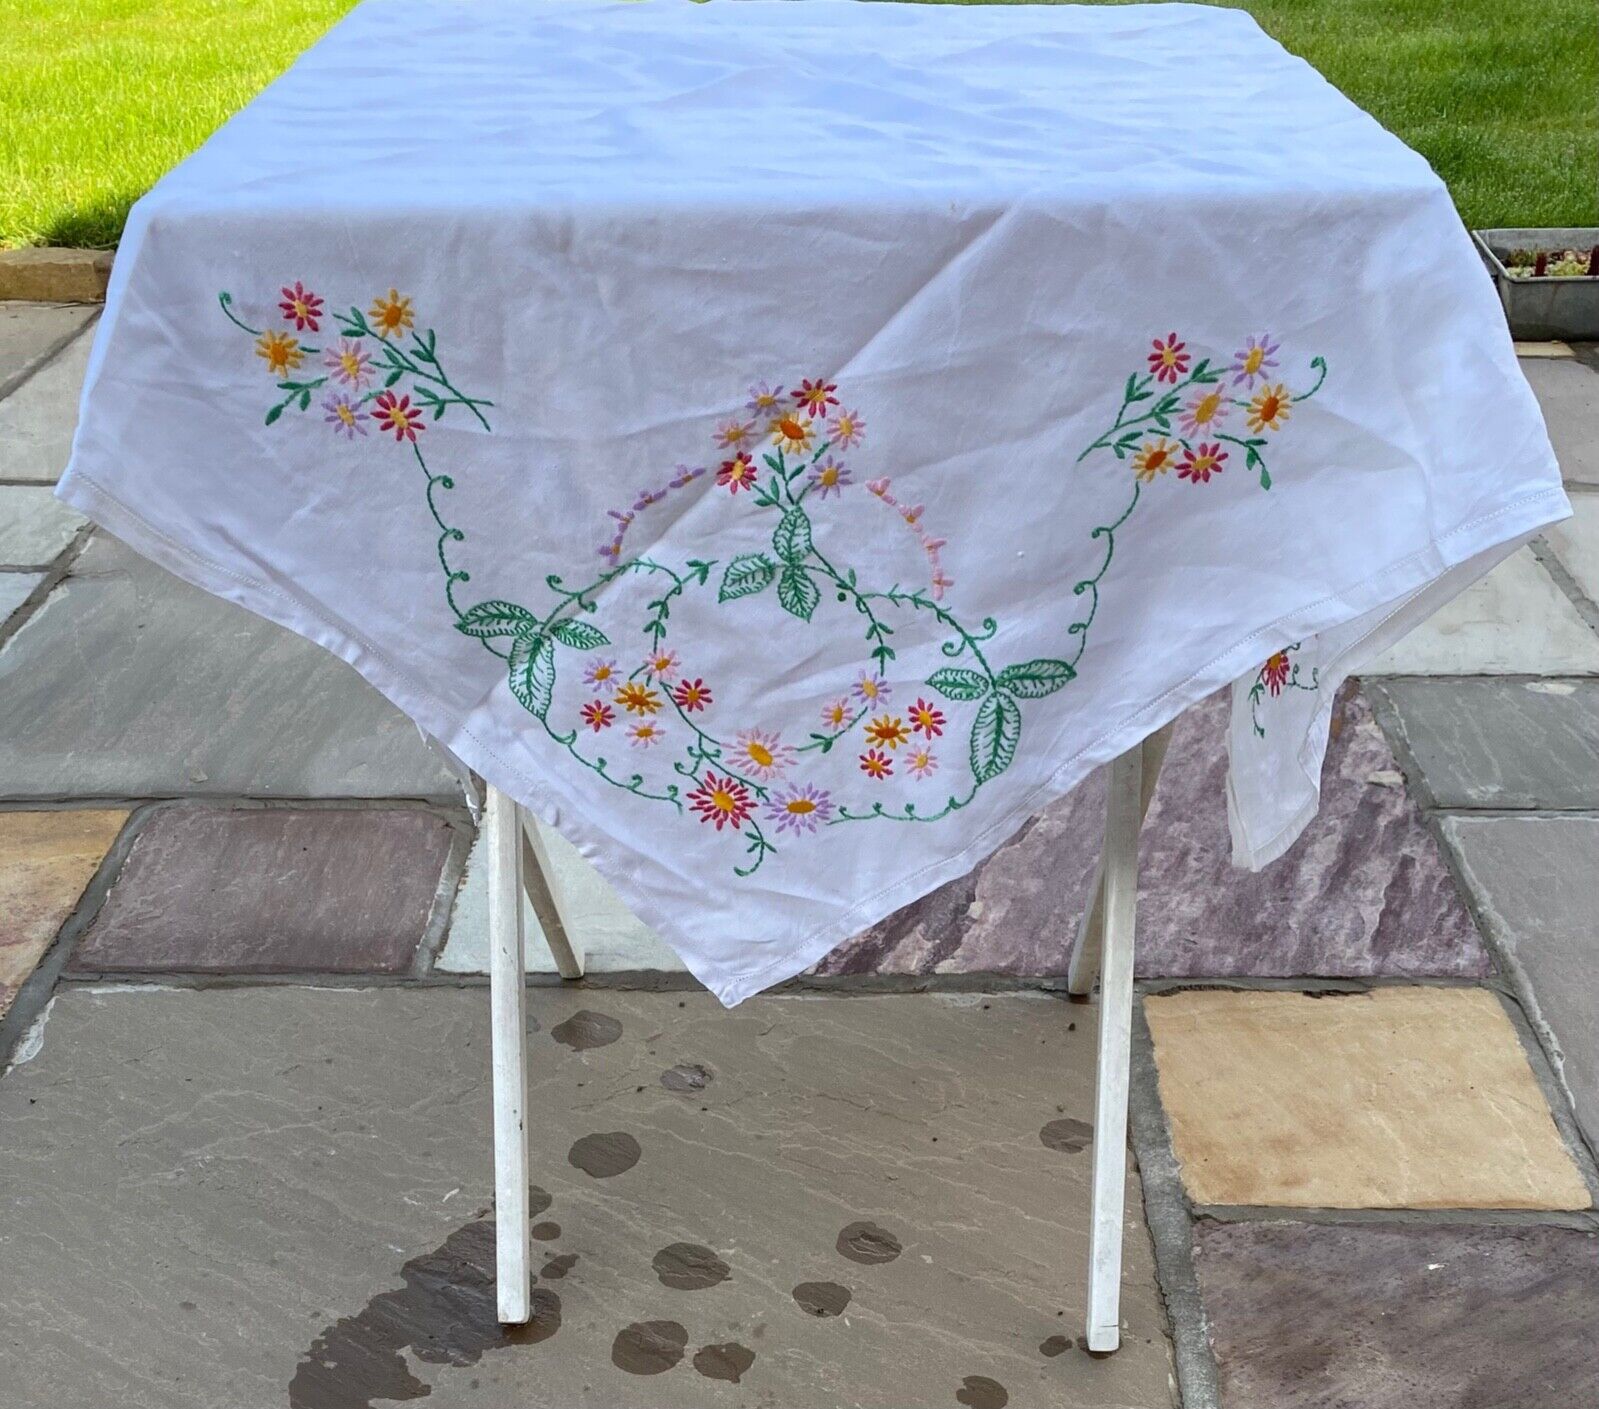 Embroidered Linen Tablecloth. Hand-sewn Fab. Needlework Vintage. Project? 40x40\